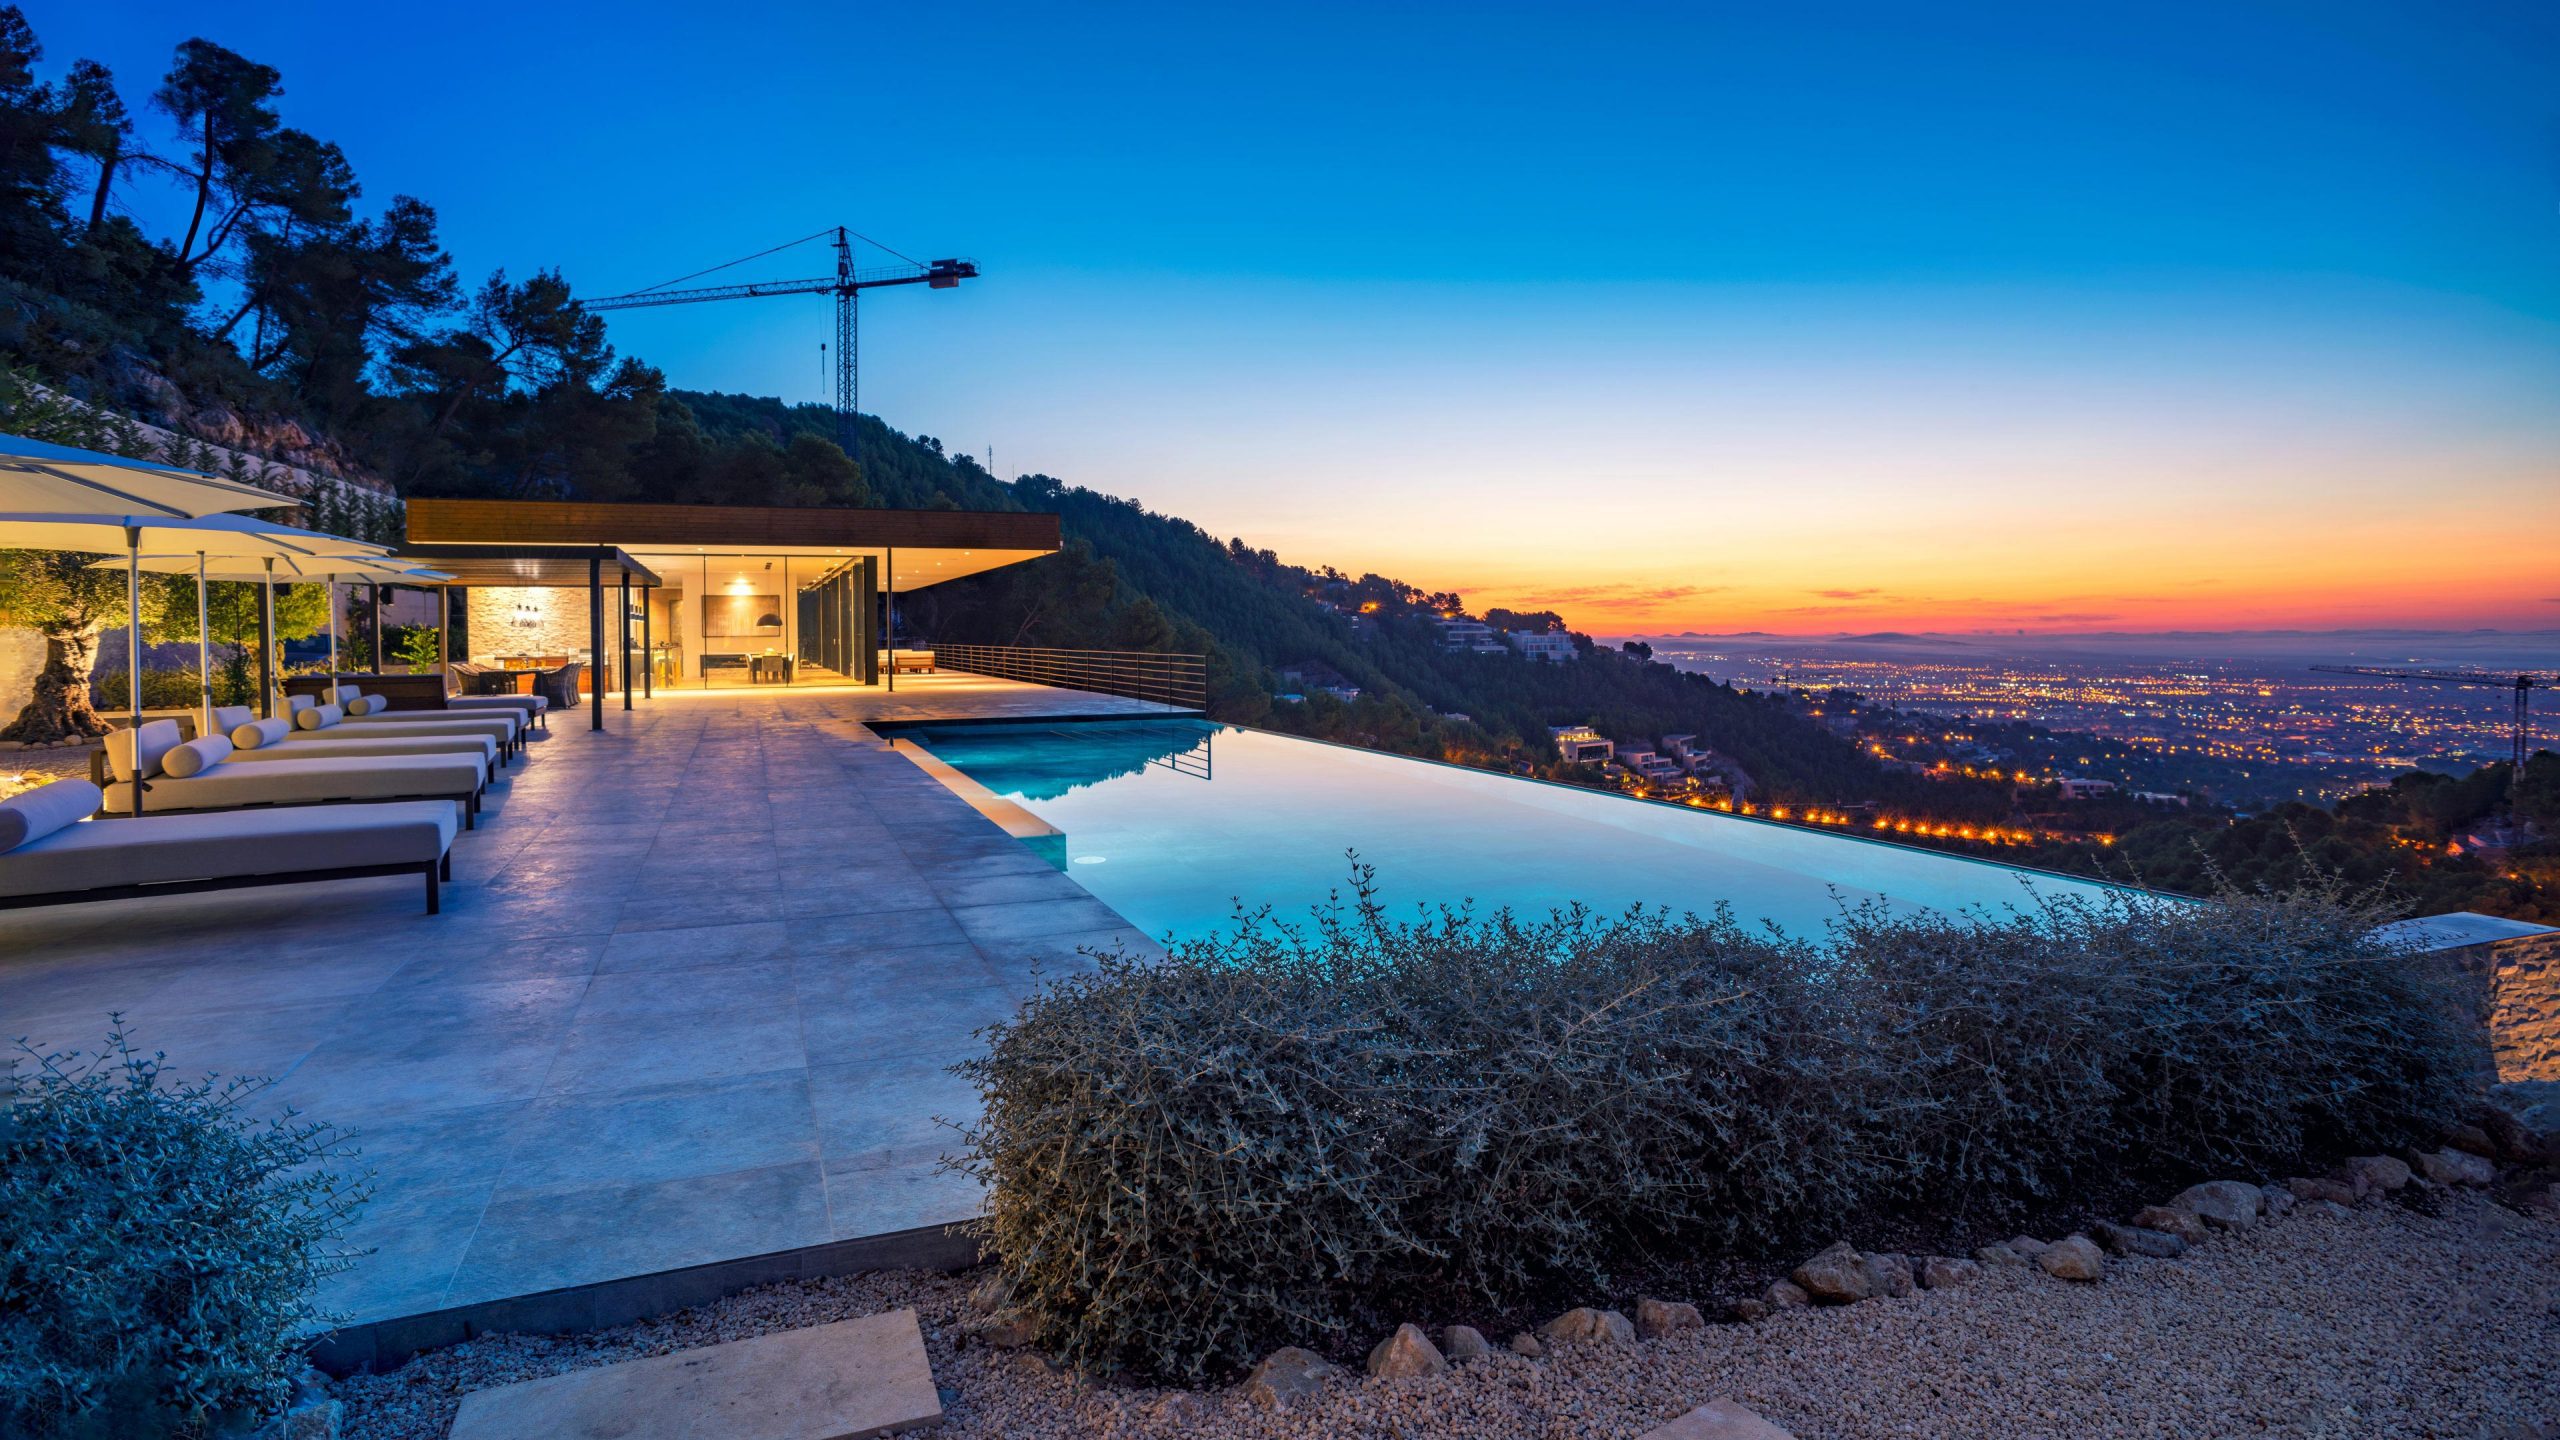 An enchanting infinity pool overlooking the city of Palma, captured at sunset by Wright Content. The city lights twinkle in the background as the poolside sun loungers invite relaxation in this cliff-top modernist home.